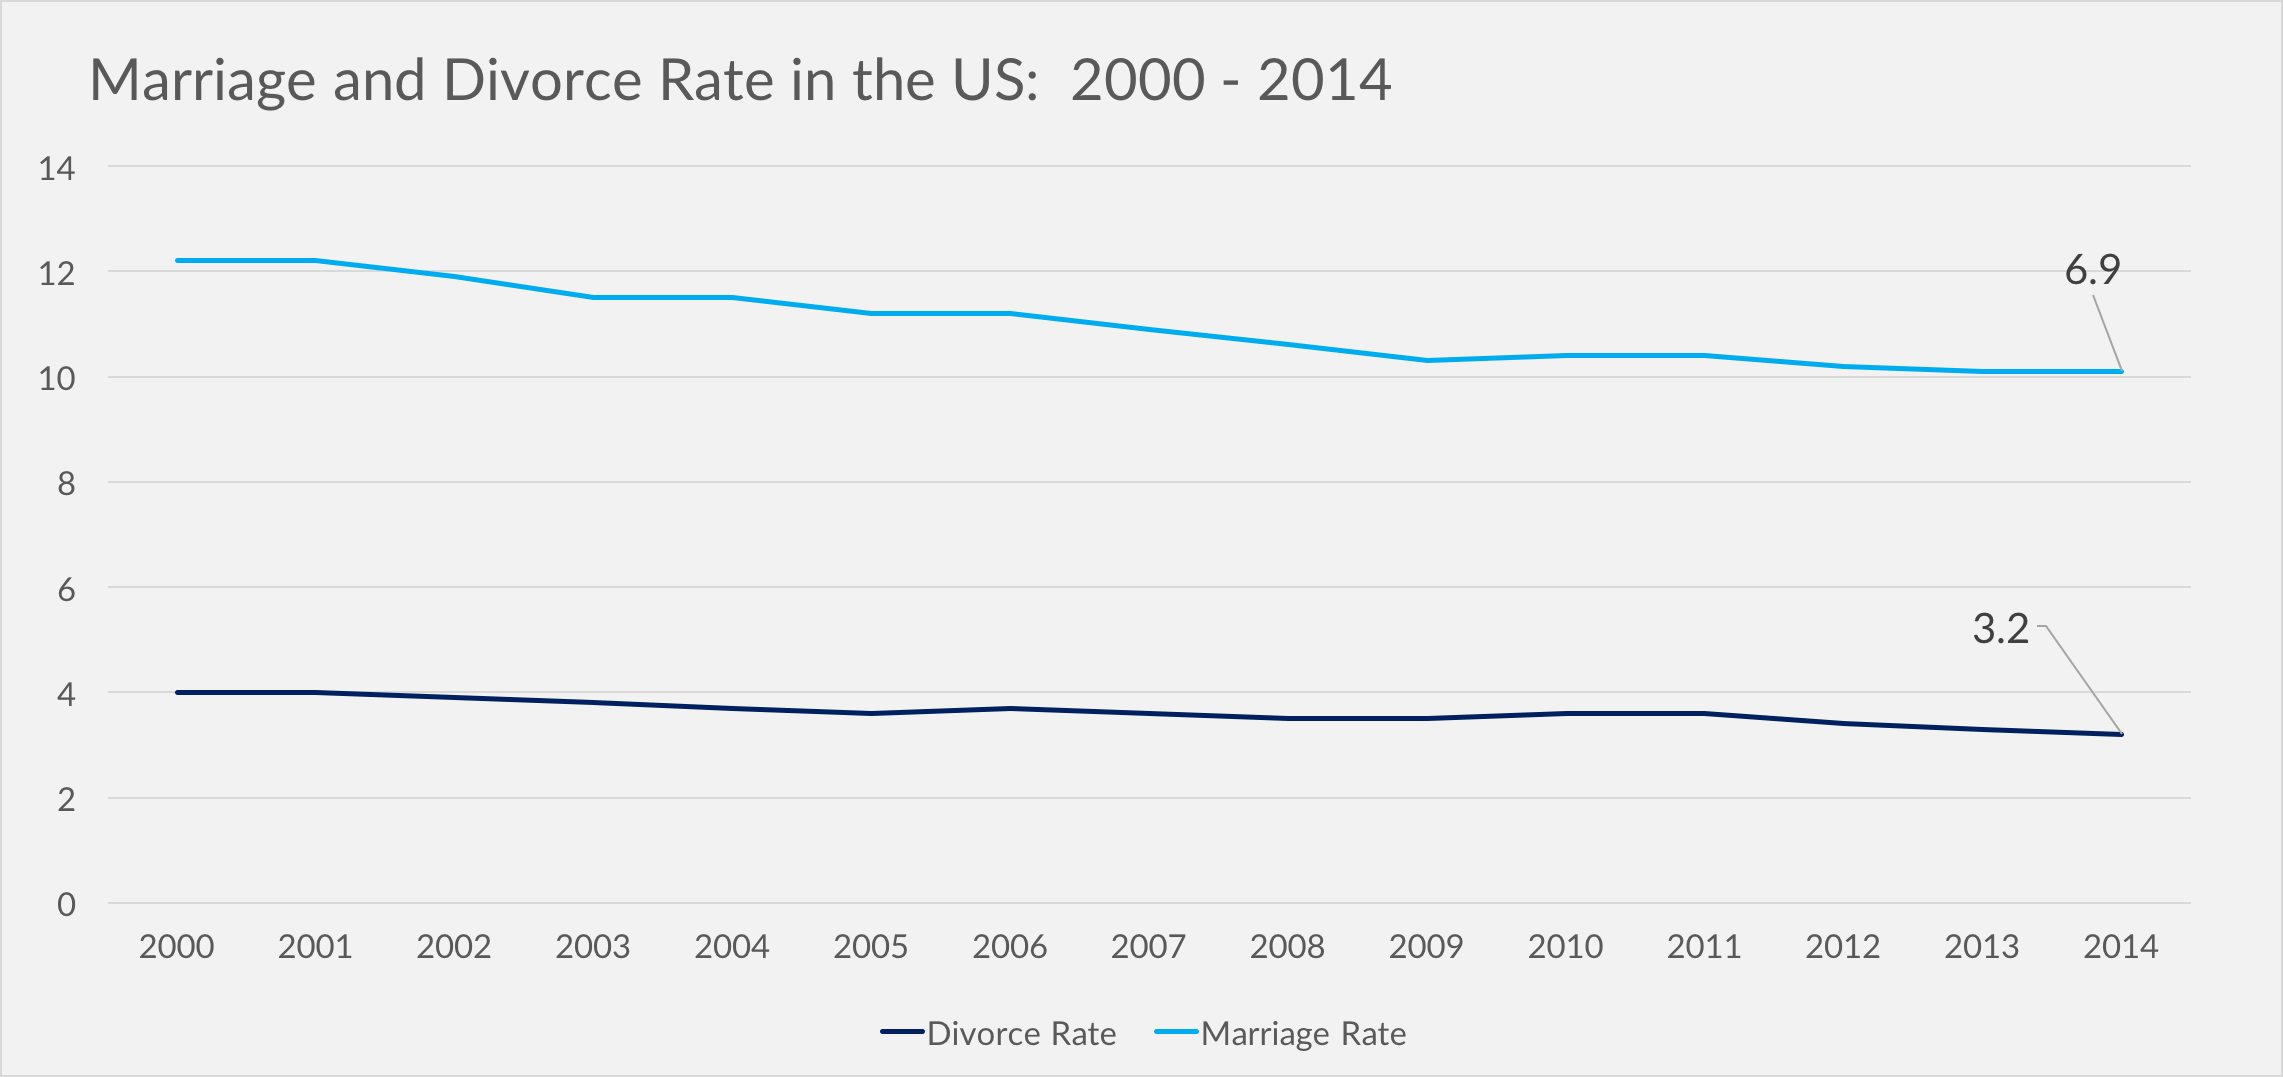 US Marriage and Divorce Rates Over Time